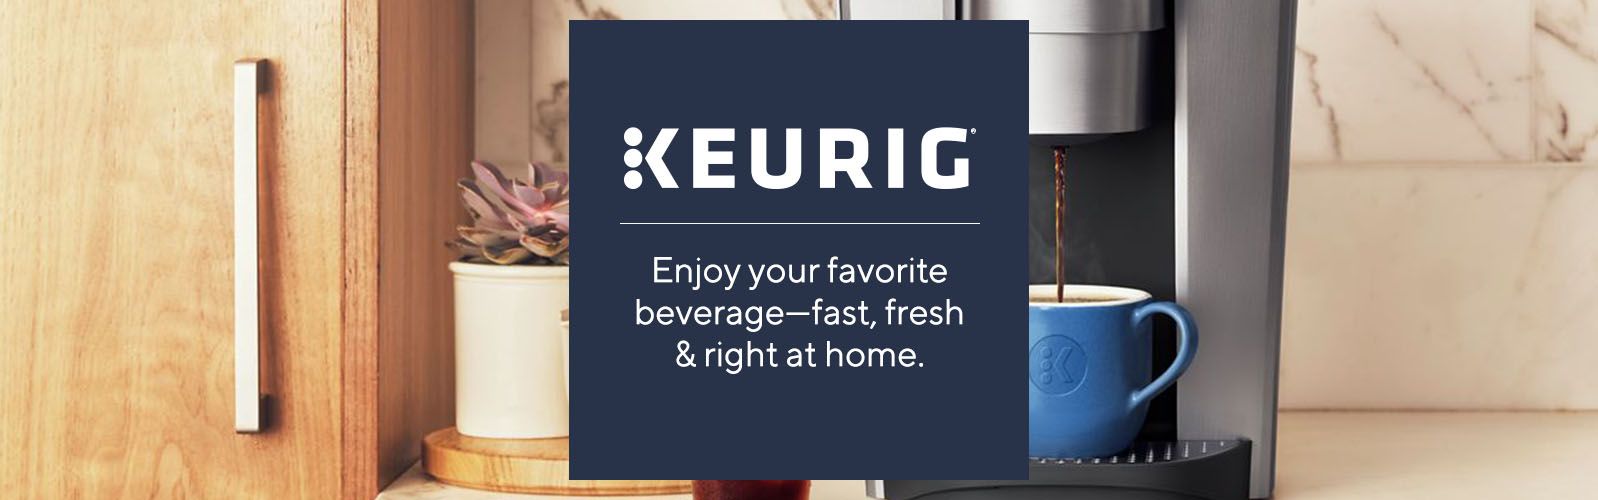 How the Keurig K-Iced Single Serve Coffee Maker Transforms Your